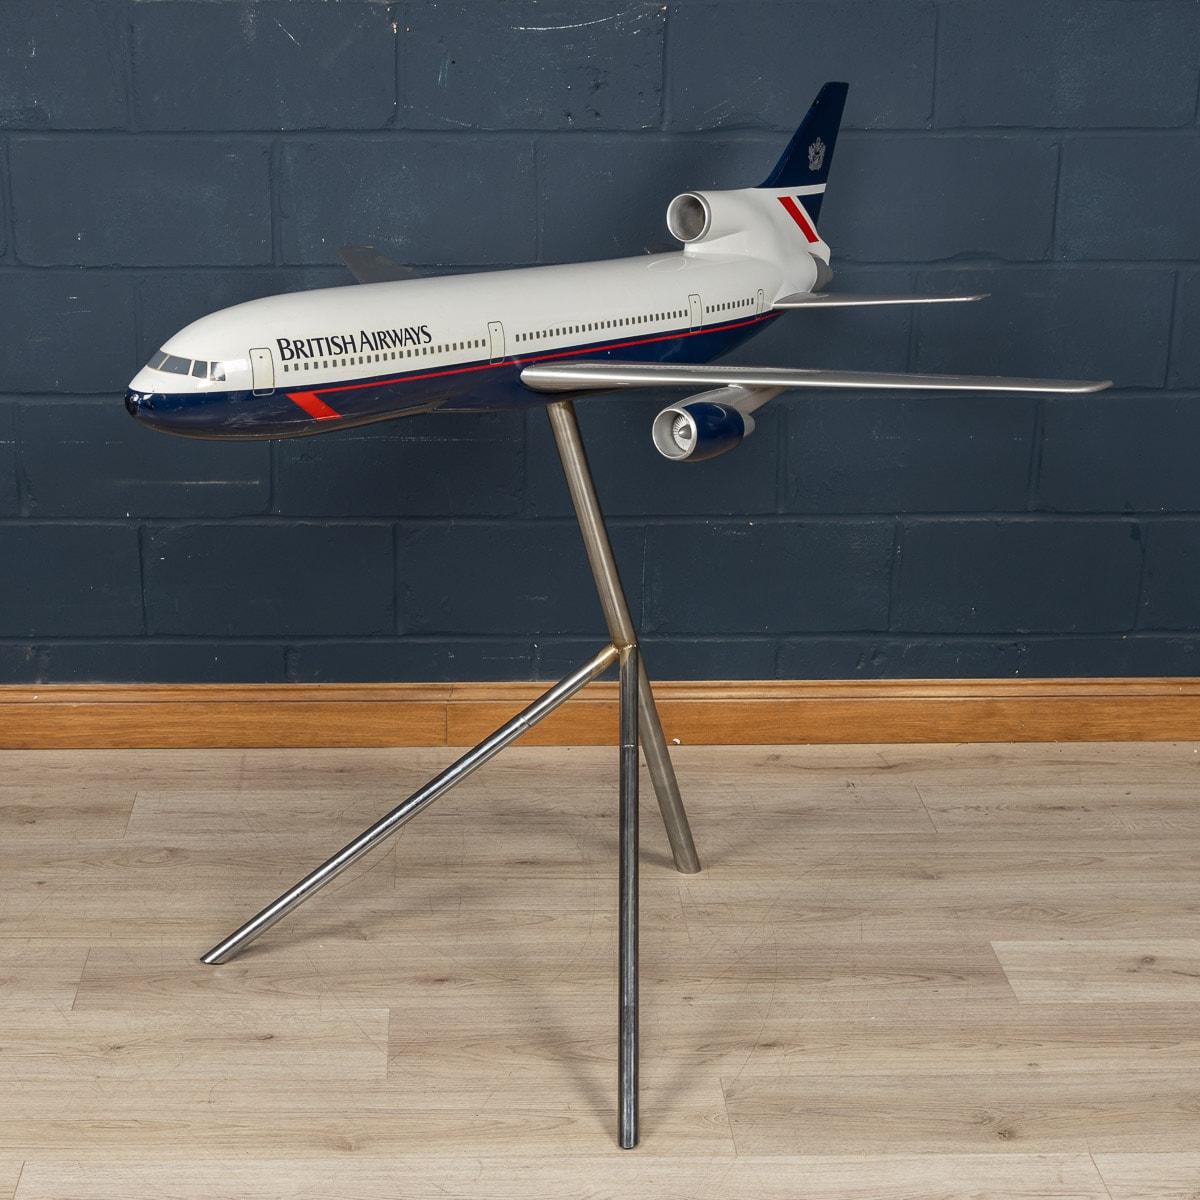 A stunning vintage fibreglass and plastic composite model of a Concorde in full British Airways livery mounted on a tripod stand by Space Models, circa 1990. This 1:36 scale aircraft model would have been presented to one of BA's top travel agents